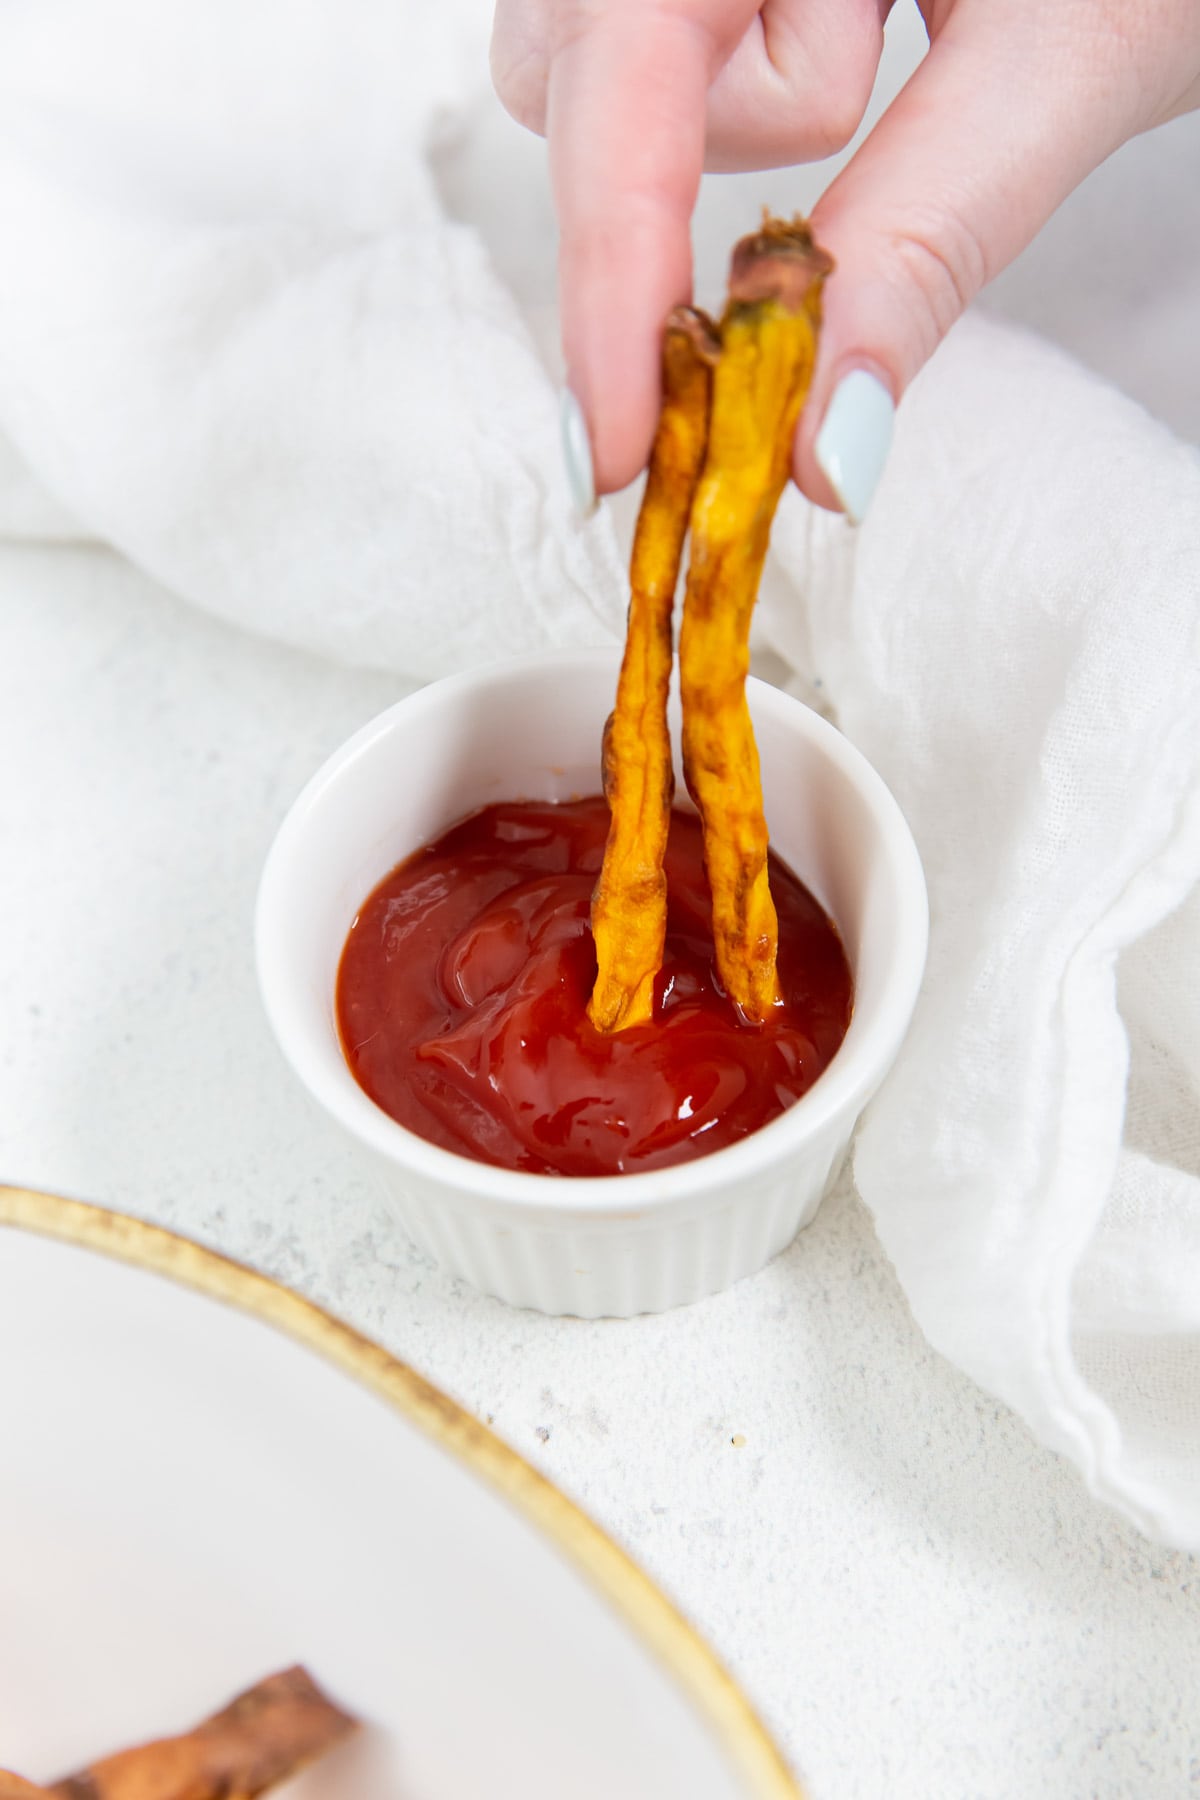 A person dipping french fries in ketchup.